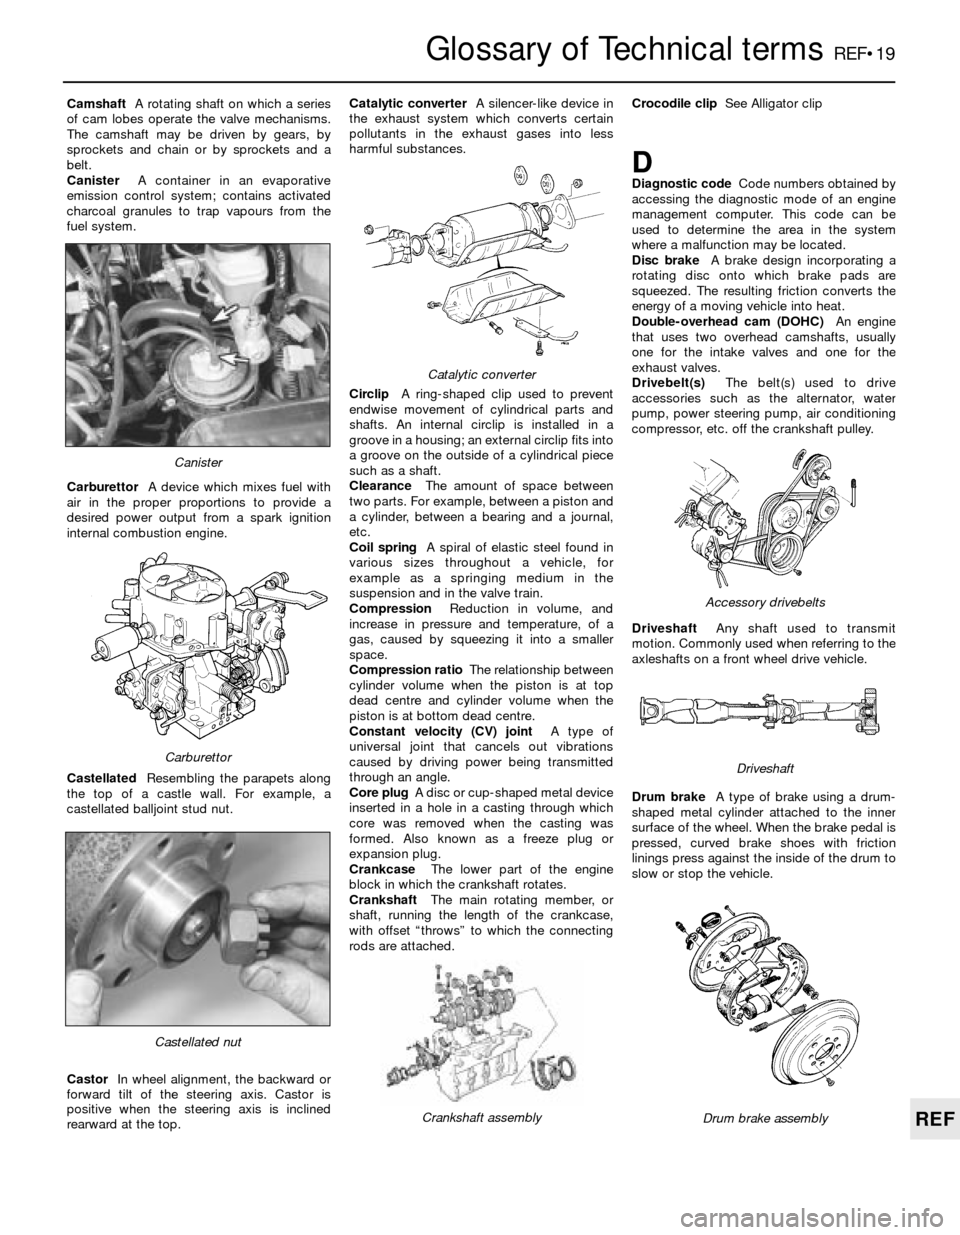 FORD SIERRA 1987 2.G Reference Workshop Manual Glossary of Technical termsREF•19
REF
CamshaftA rotating shaft on which a series
of cam lobes operate the valve mechanisms.
The camshaft may be driven by gears, by
sprockets and chain or by sprocket